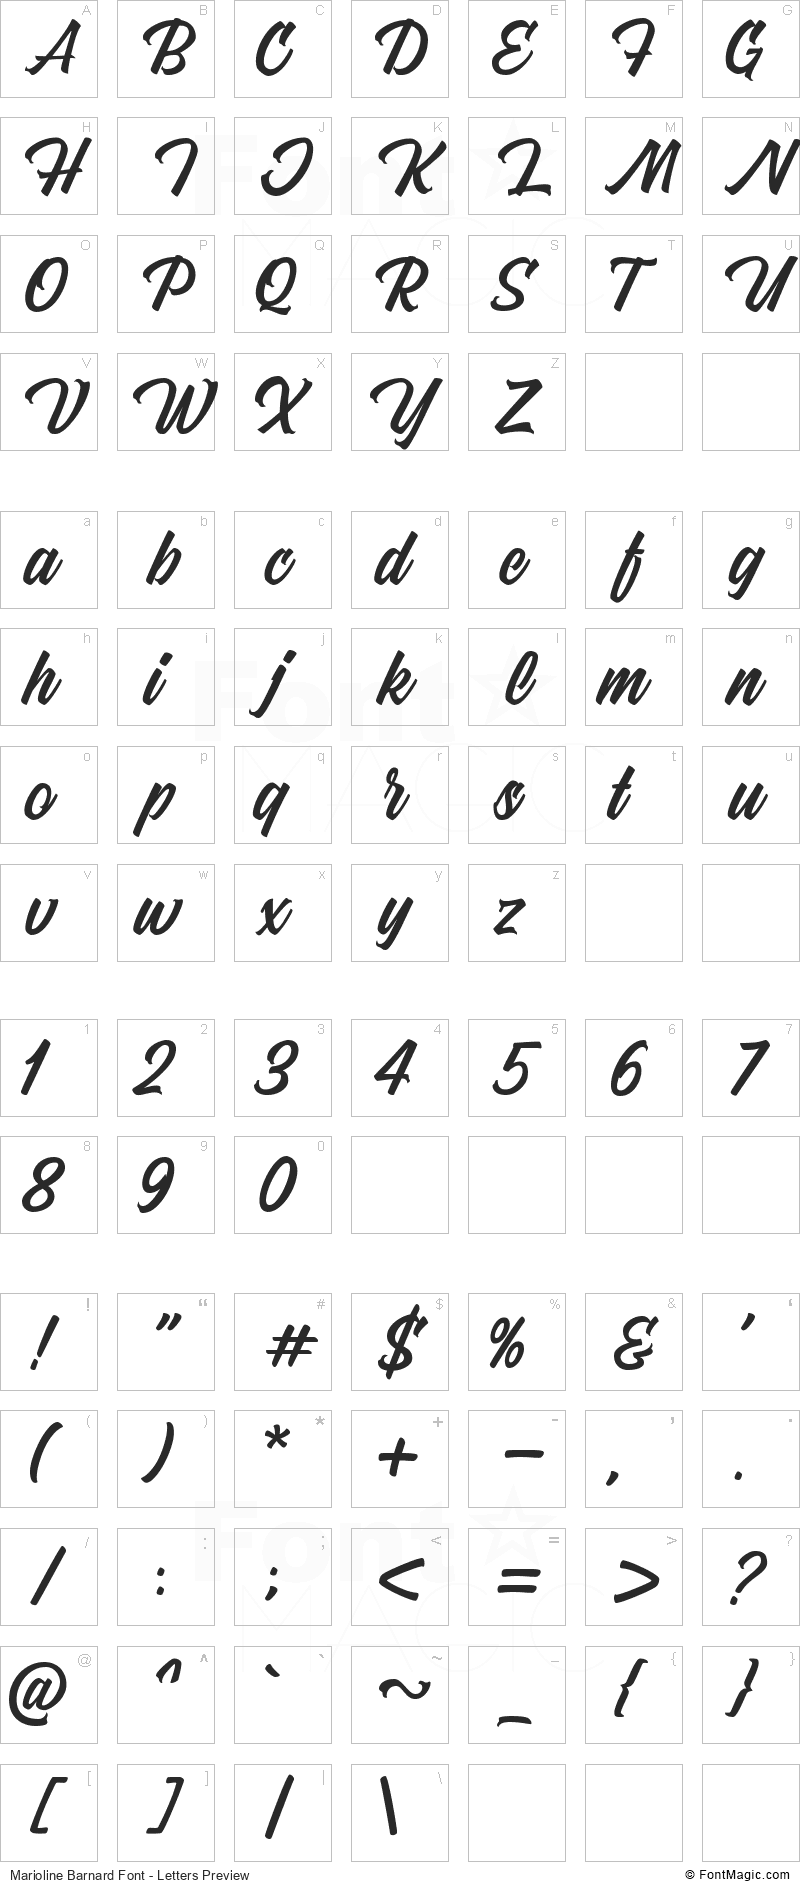 Marioline Barnard Font - All Latters Preview Chart